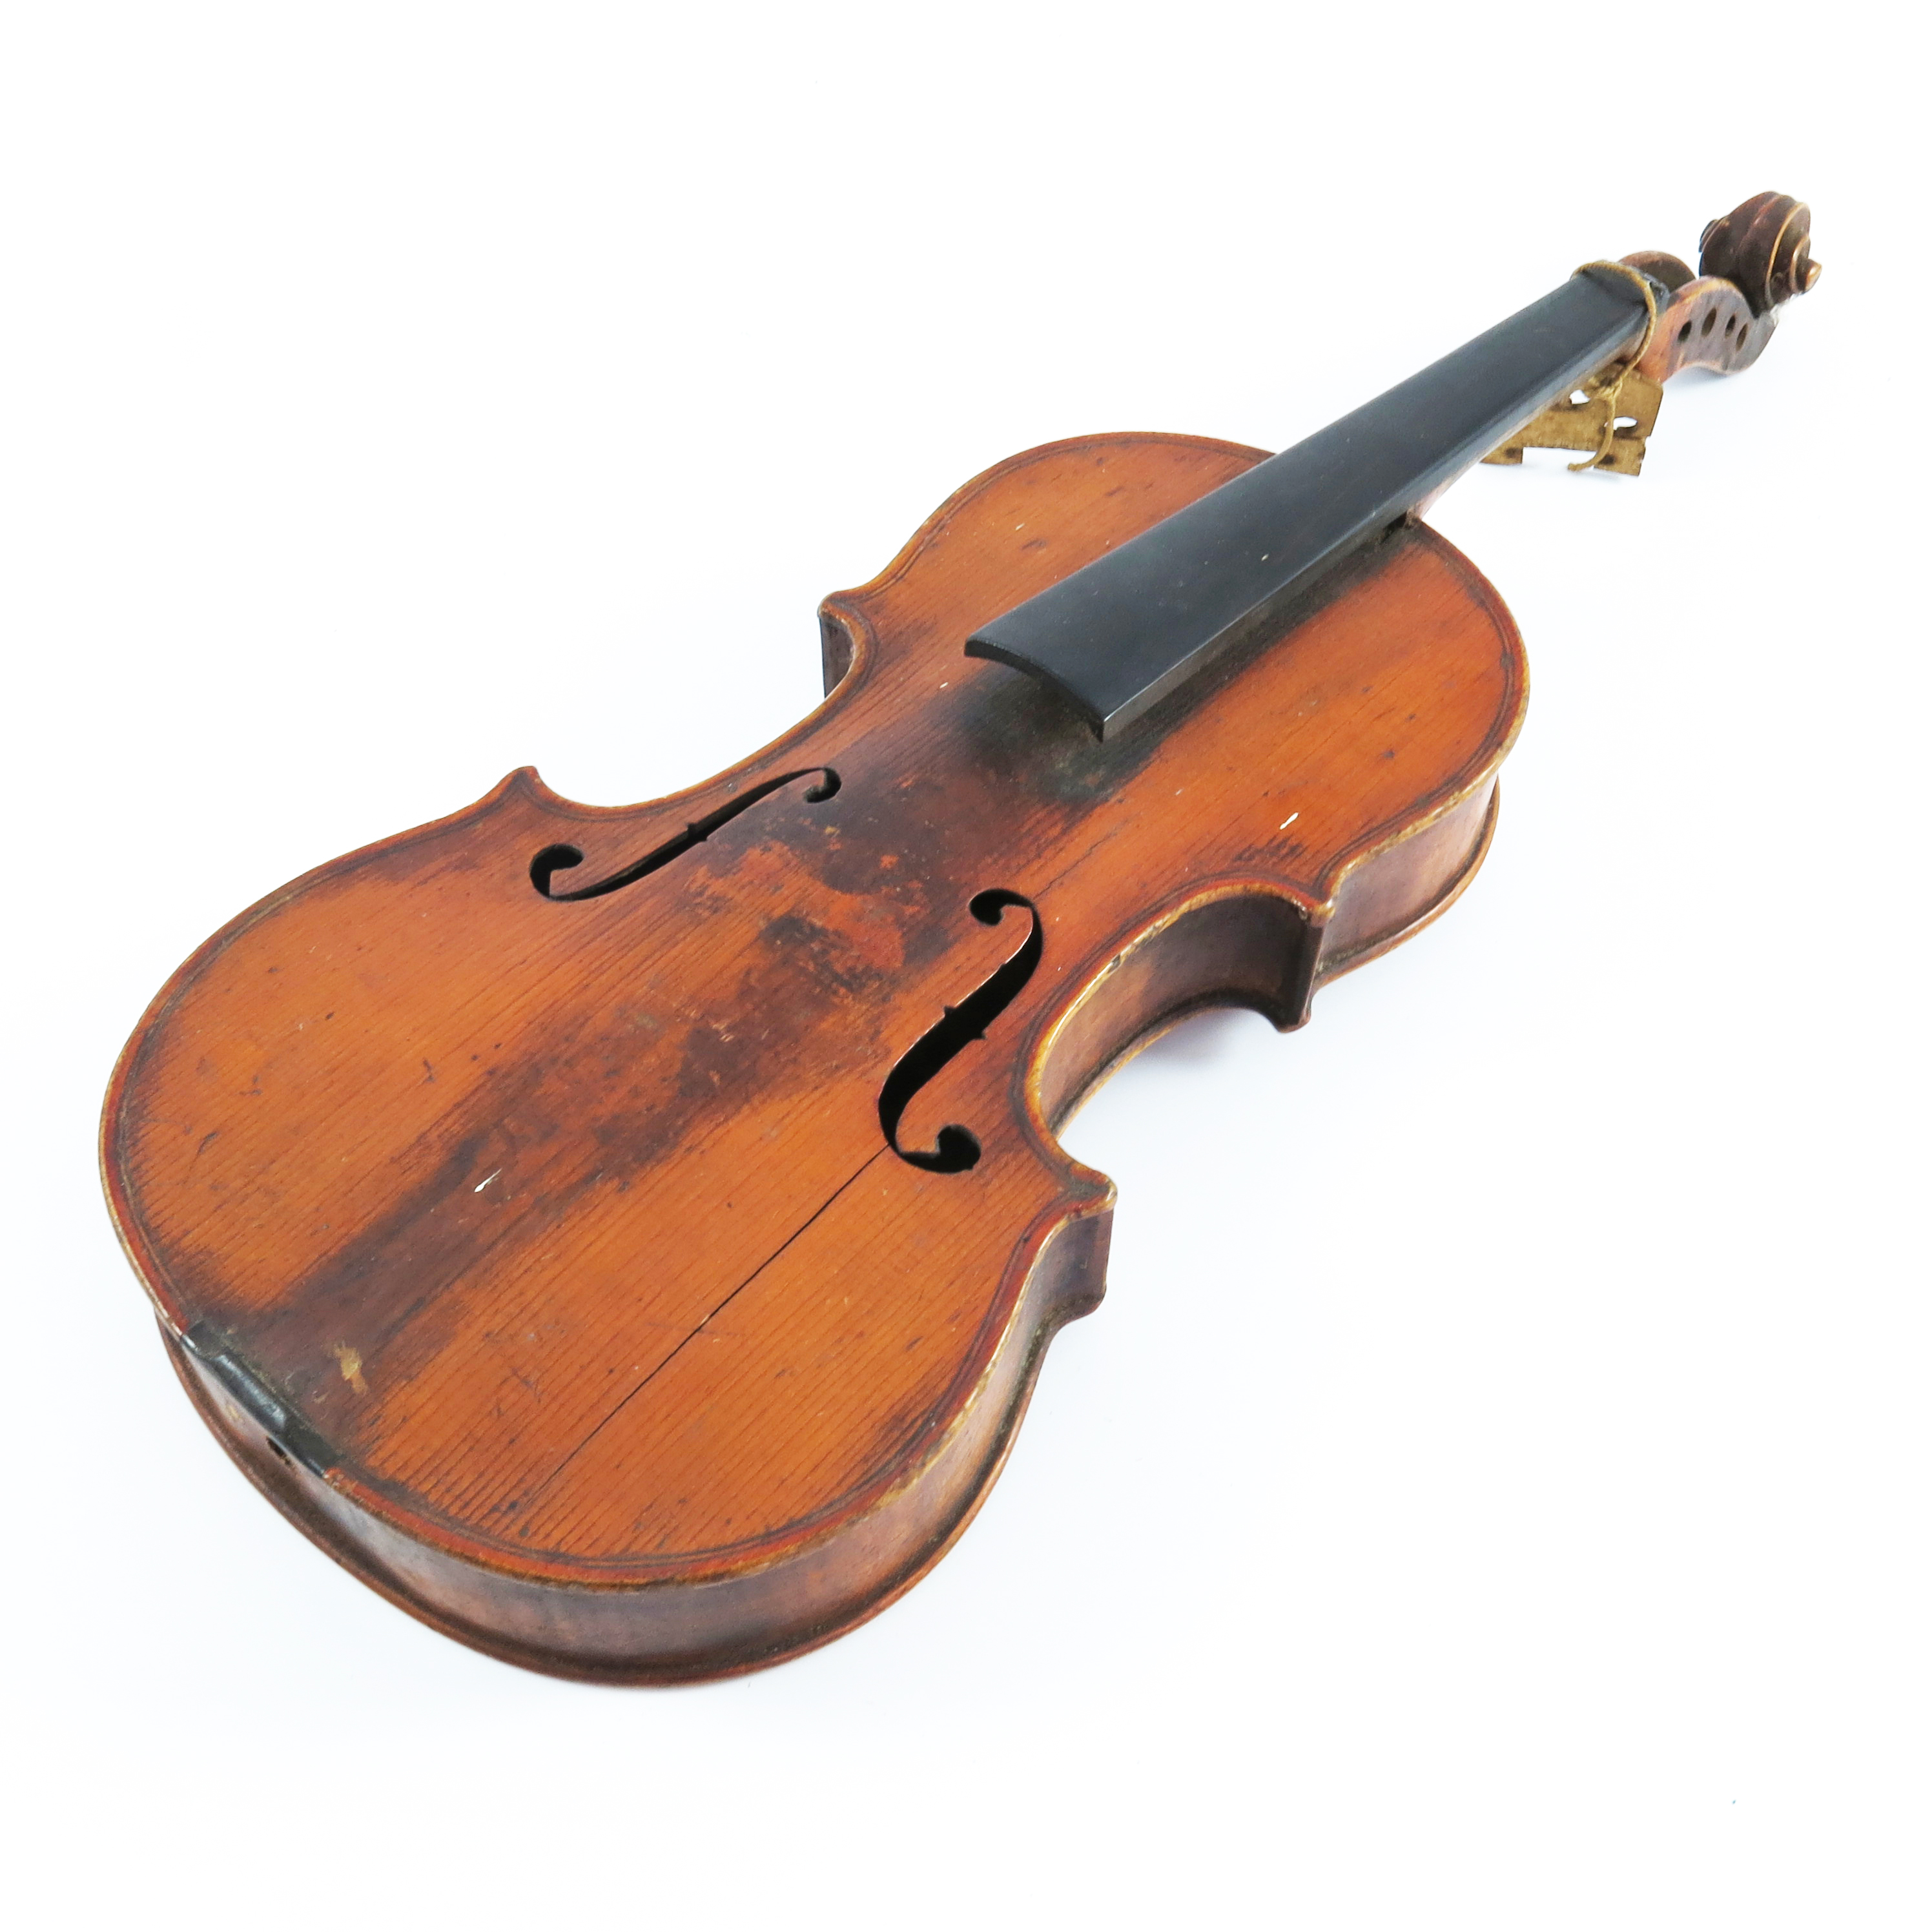 19TH CENTURY CHILD'S VIOLIN, APPROX. 47 cm OVERALL, BACK 29 cm INC. BUTTON, PROVENANCE RIPPLE HALL